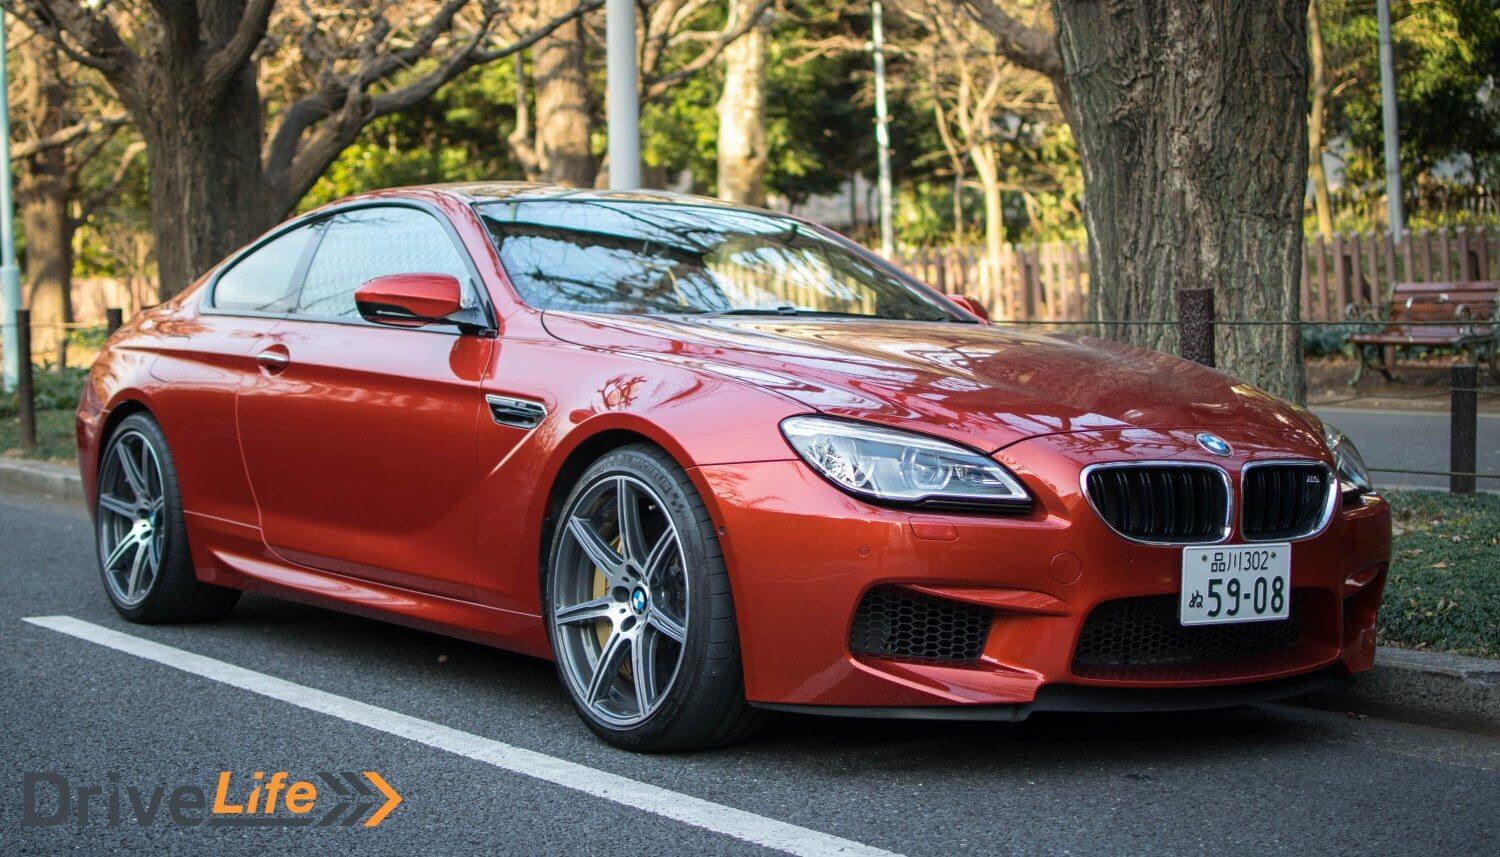 drive-life-nz-car-review-bmw-m6-competition-2016